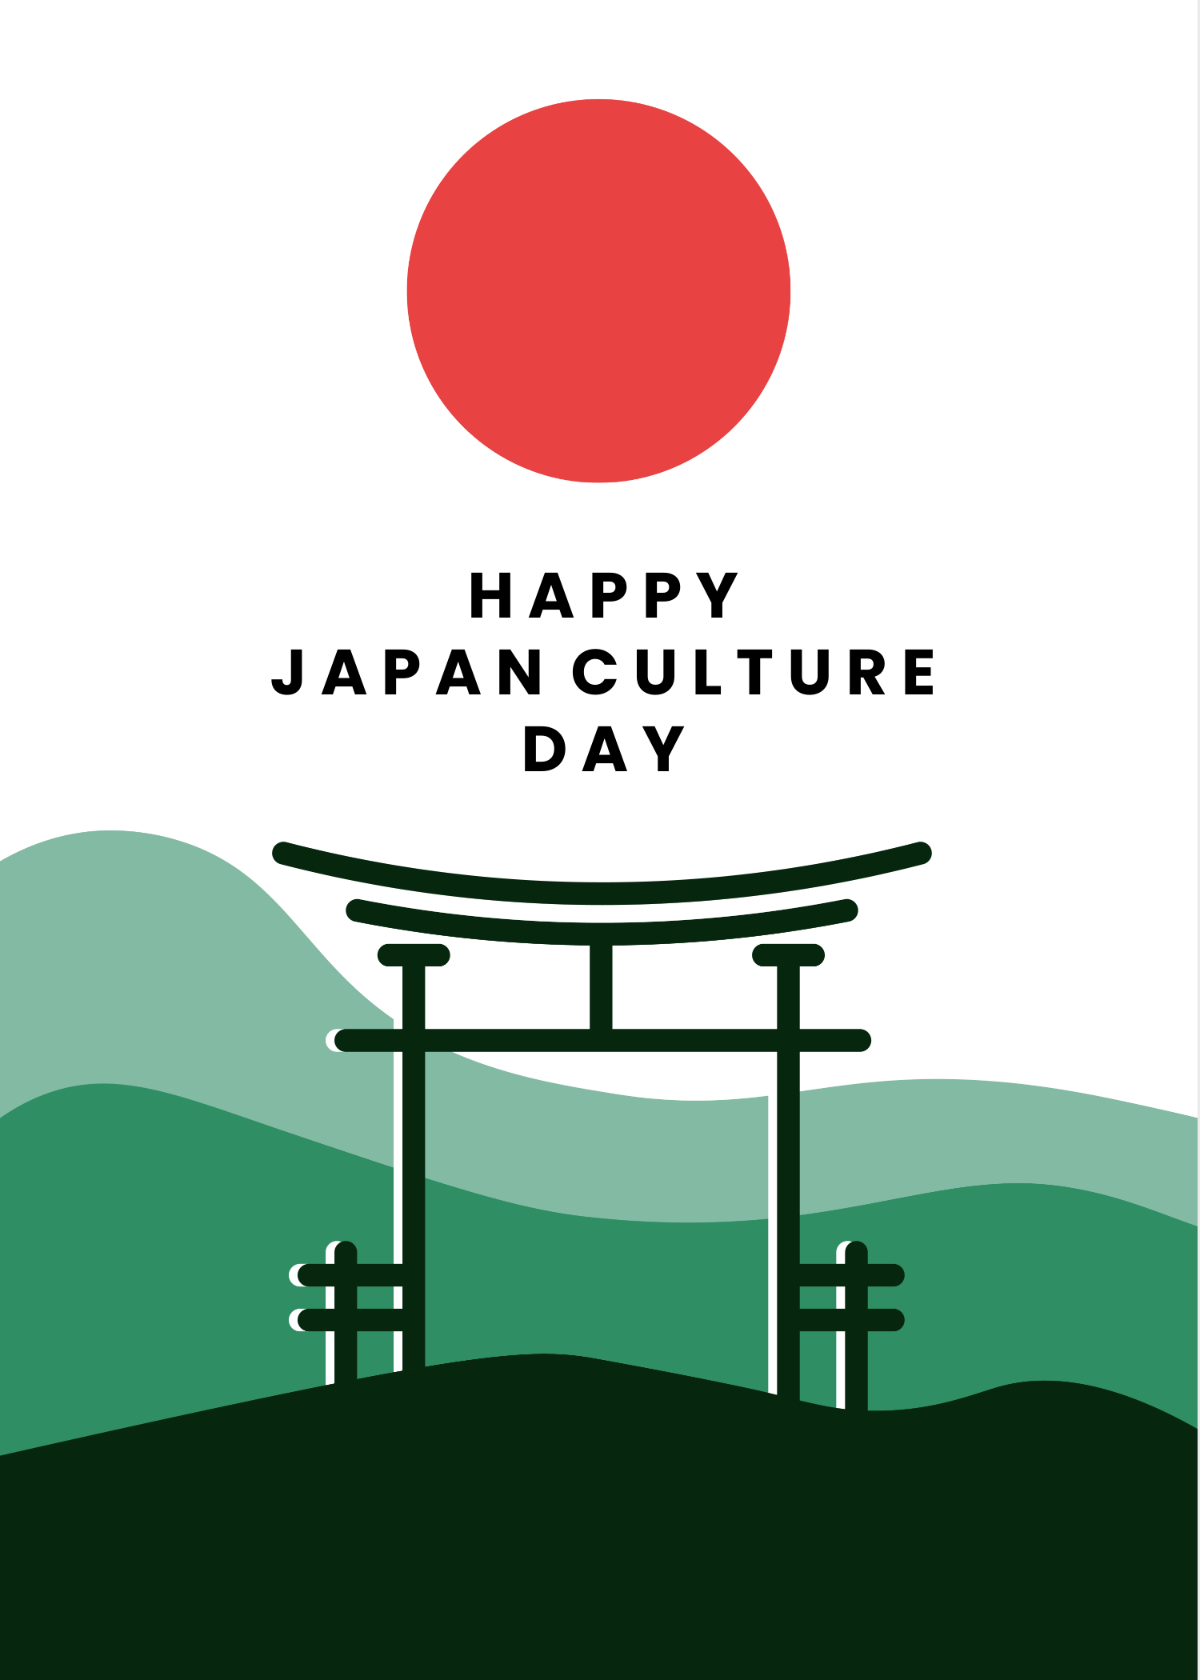 Japan Culture Day Greeting Card Template